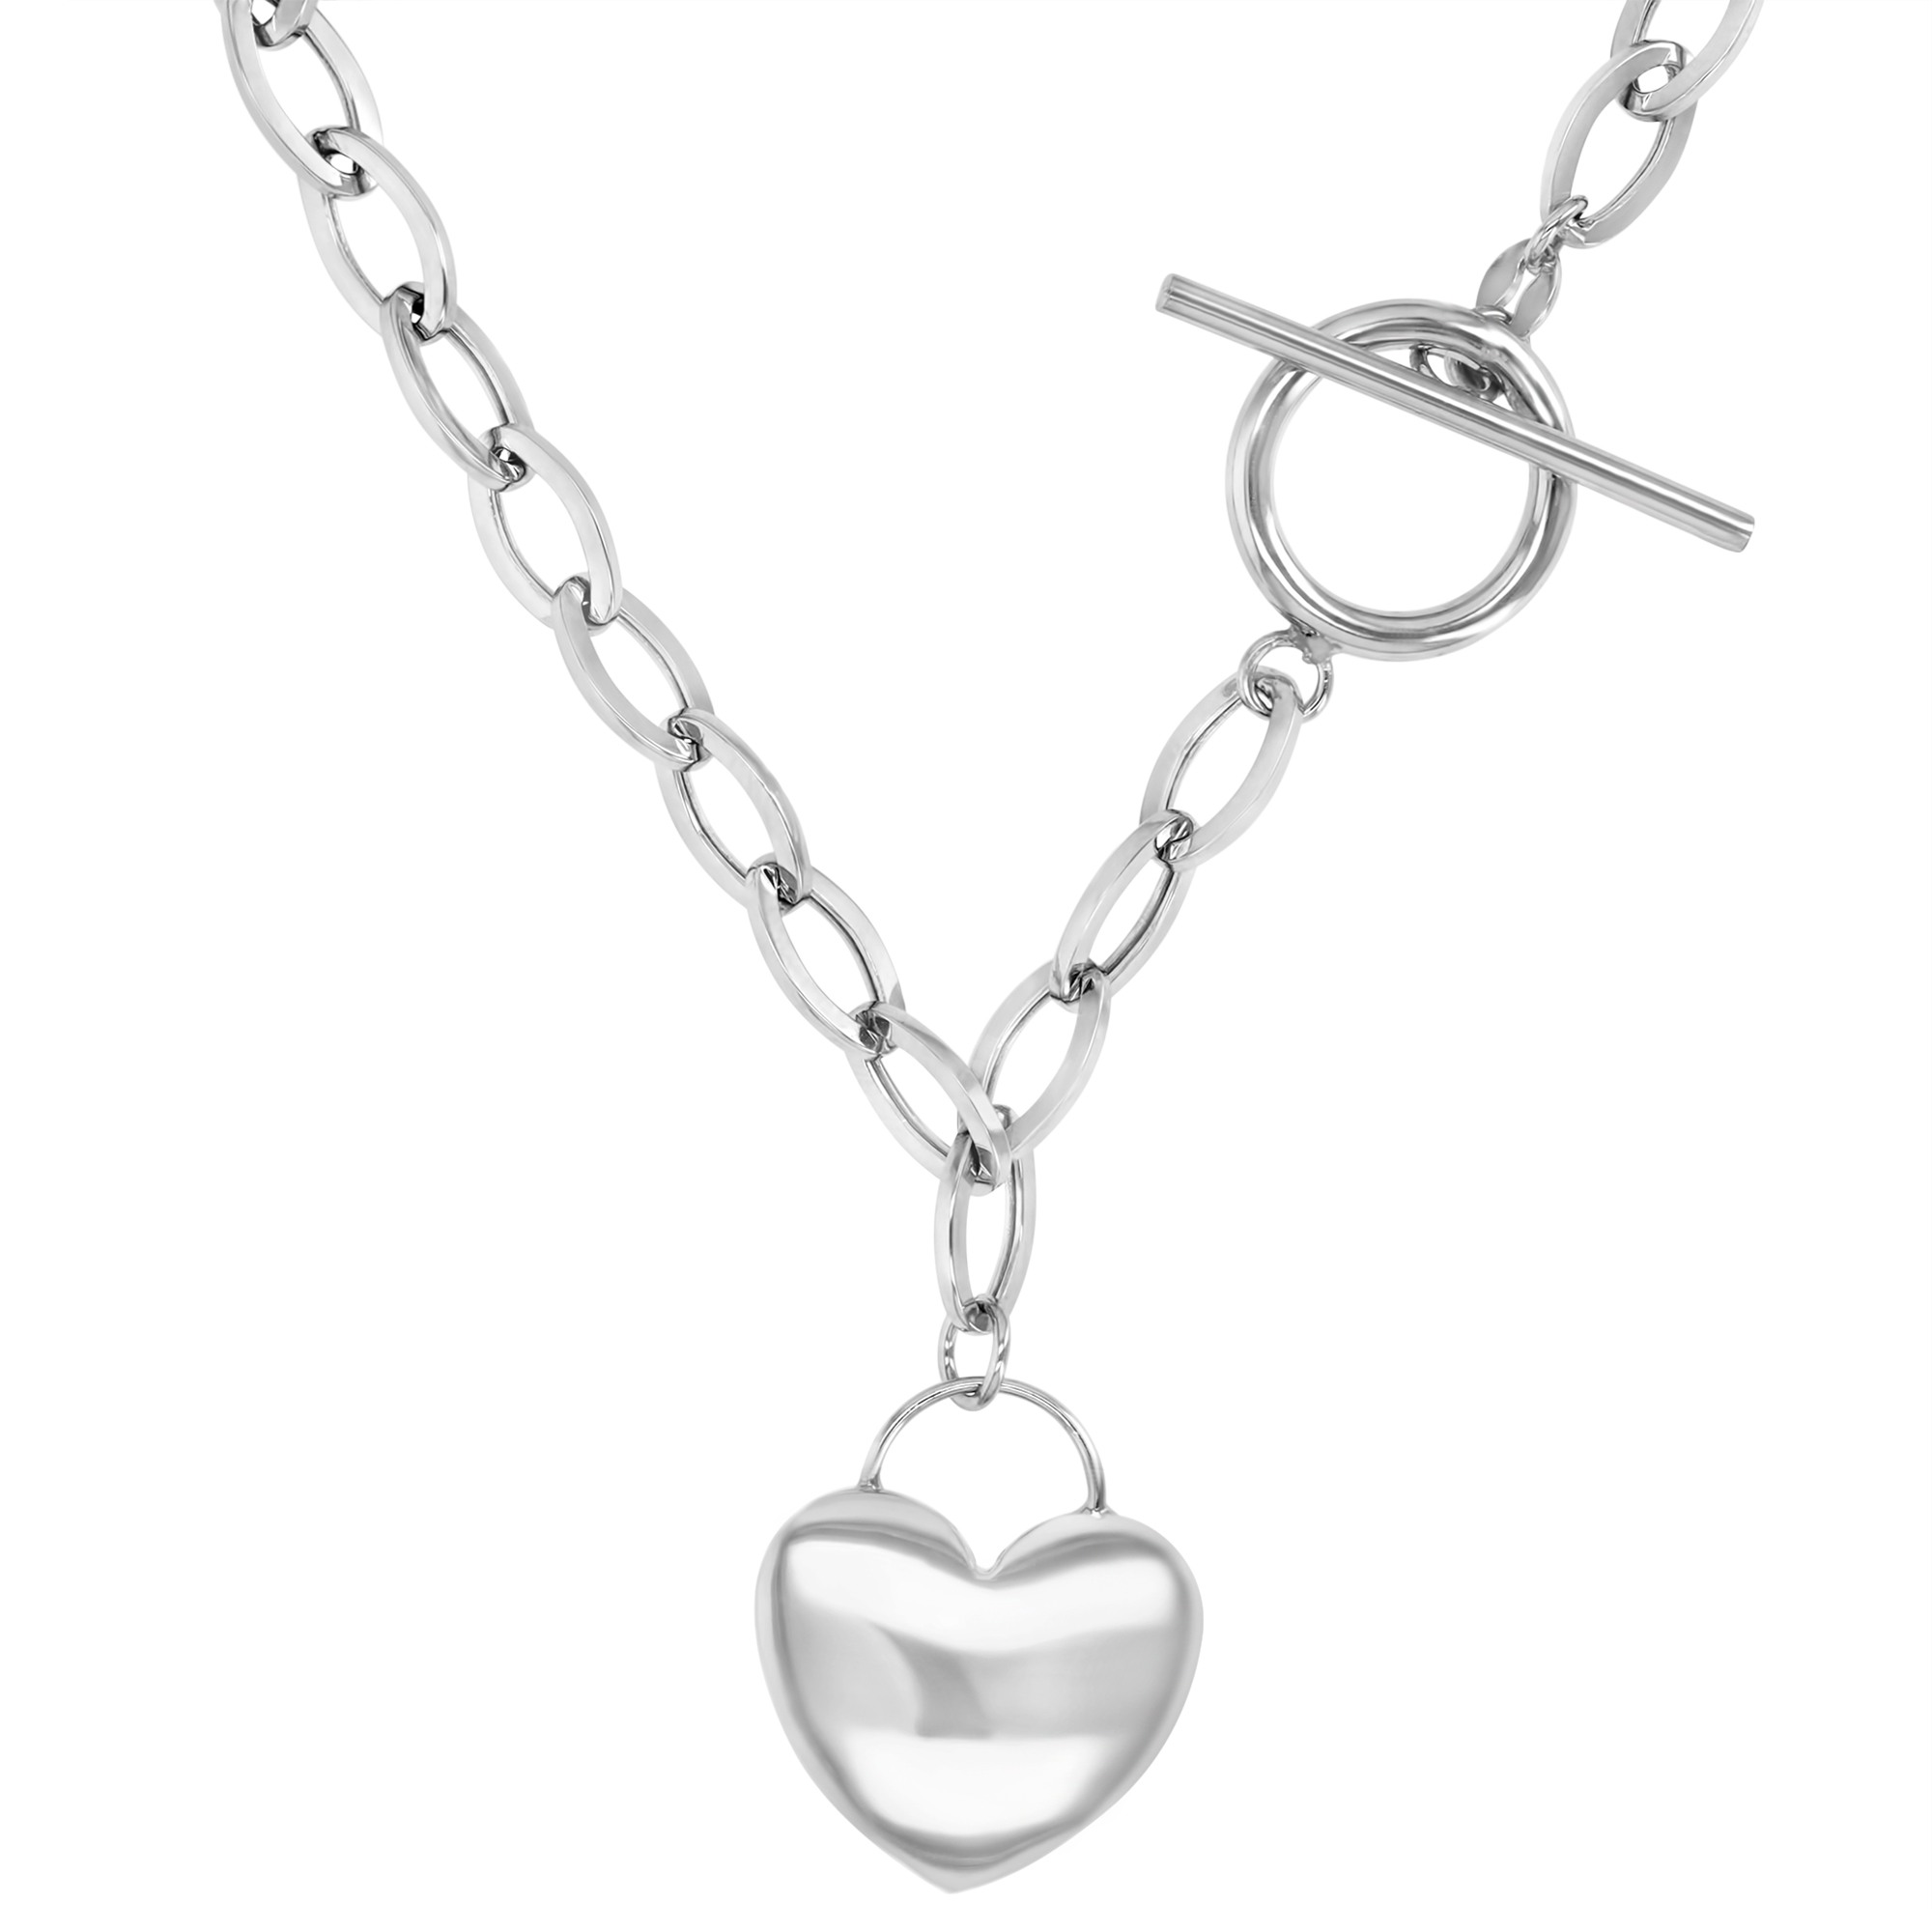 14K White Gold 17" Heart Toggle Necklace